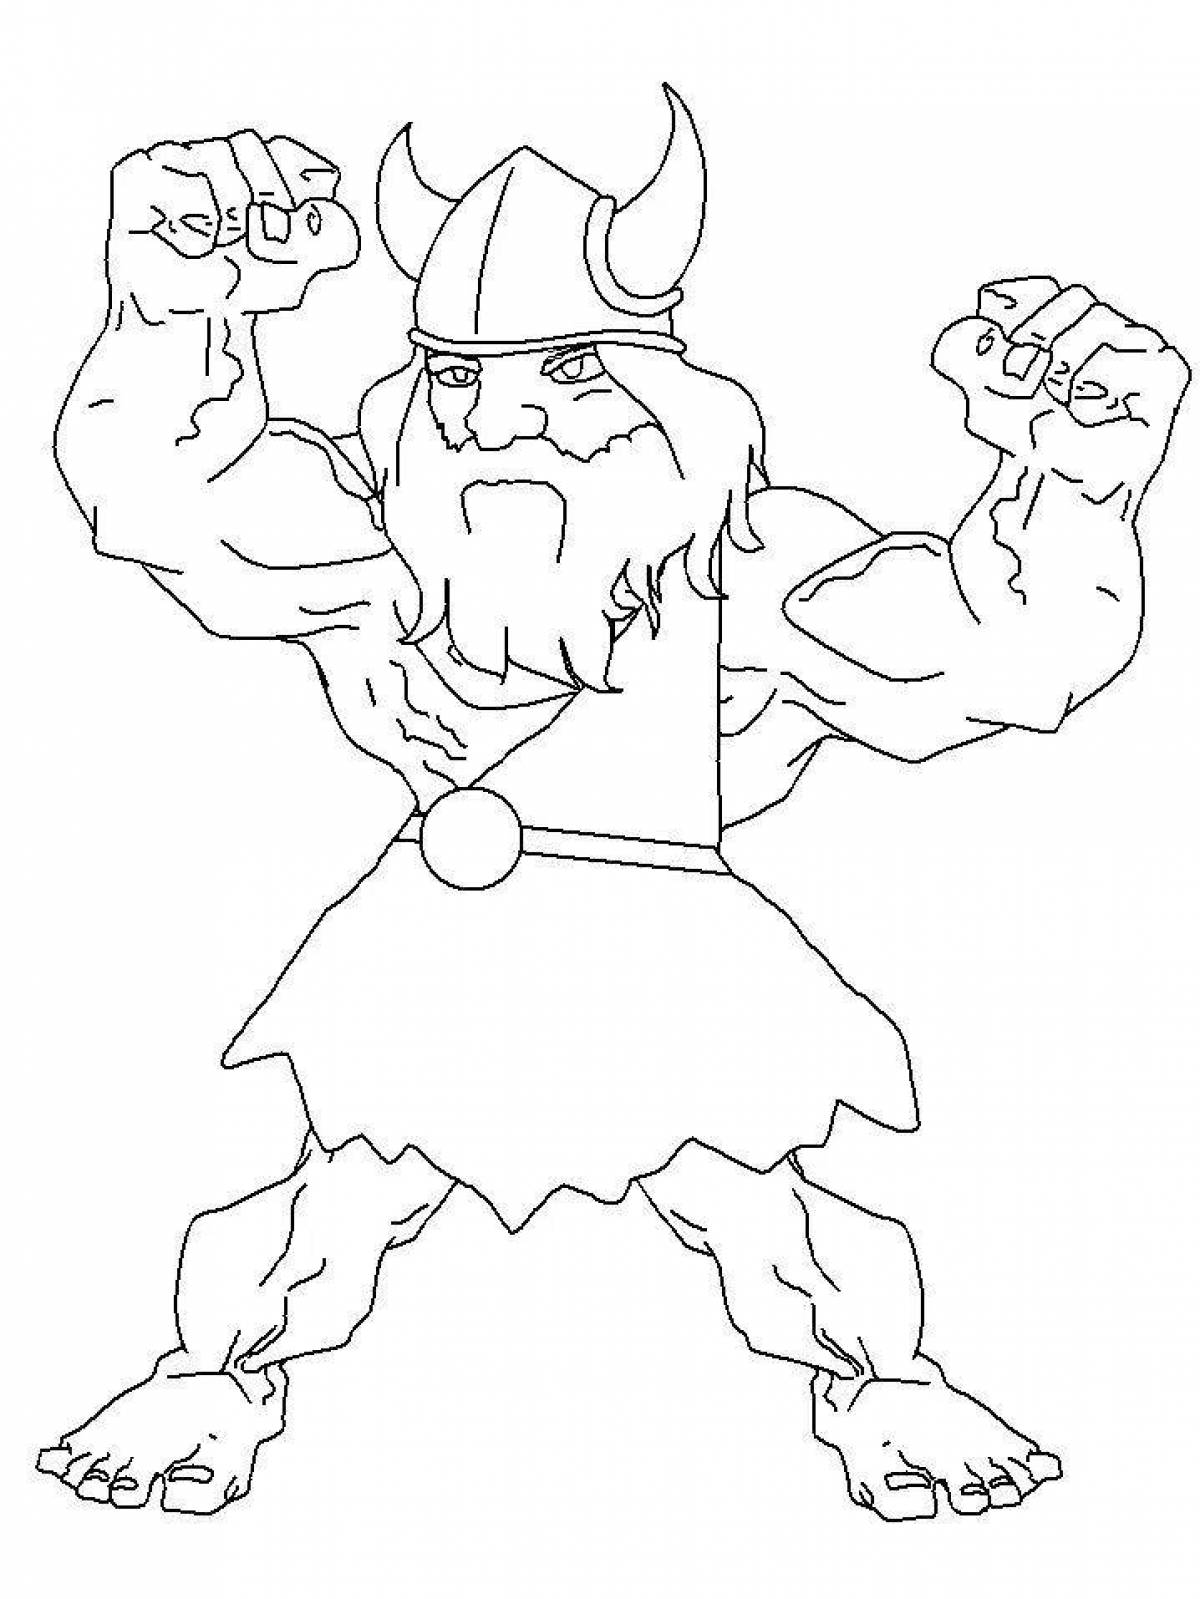 Luxury viking coloring page